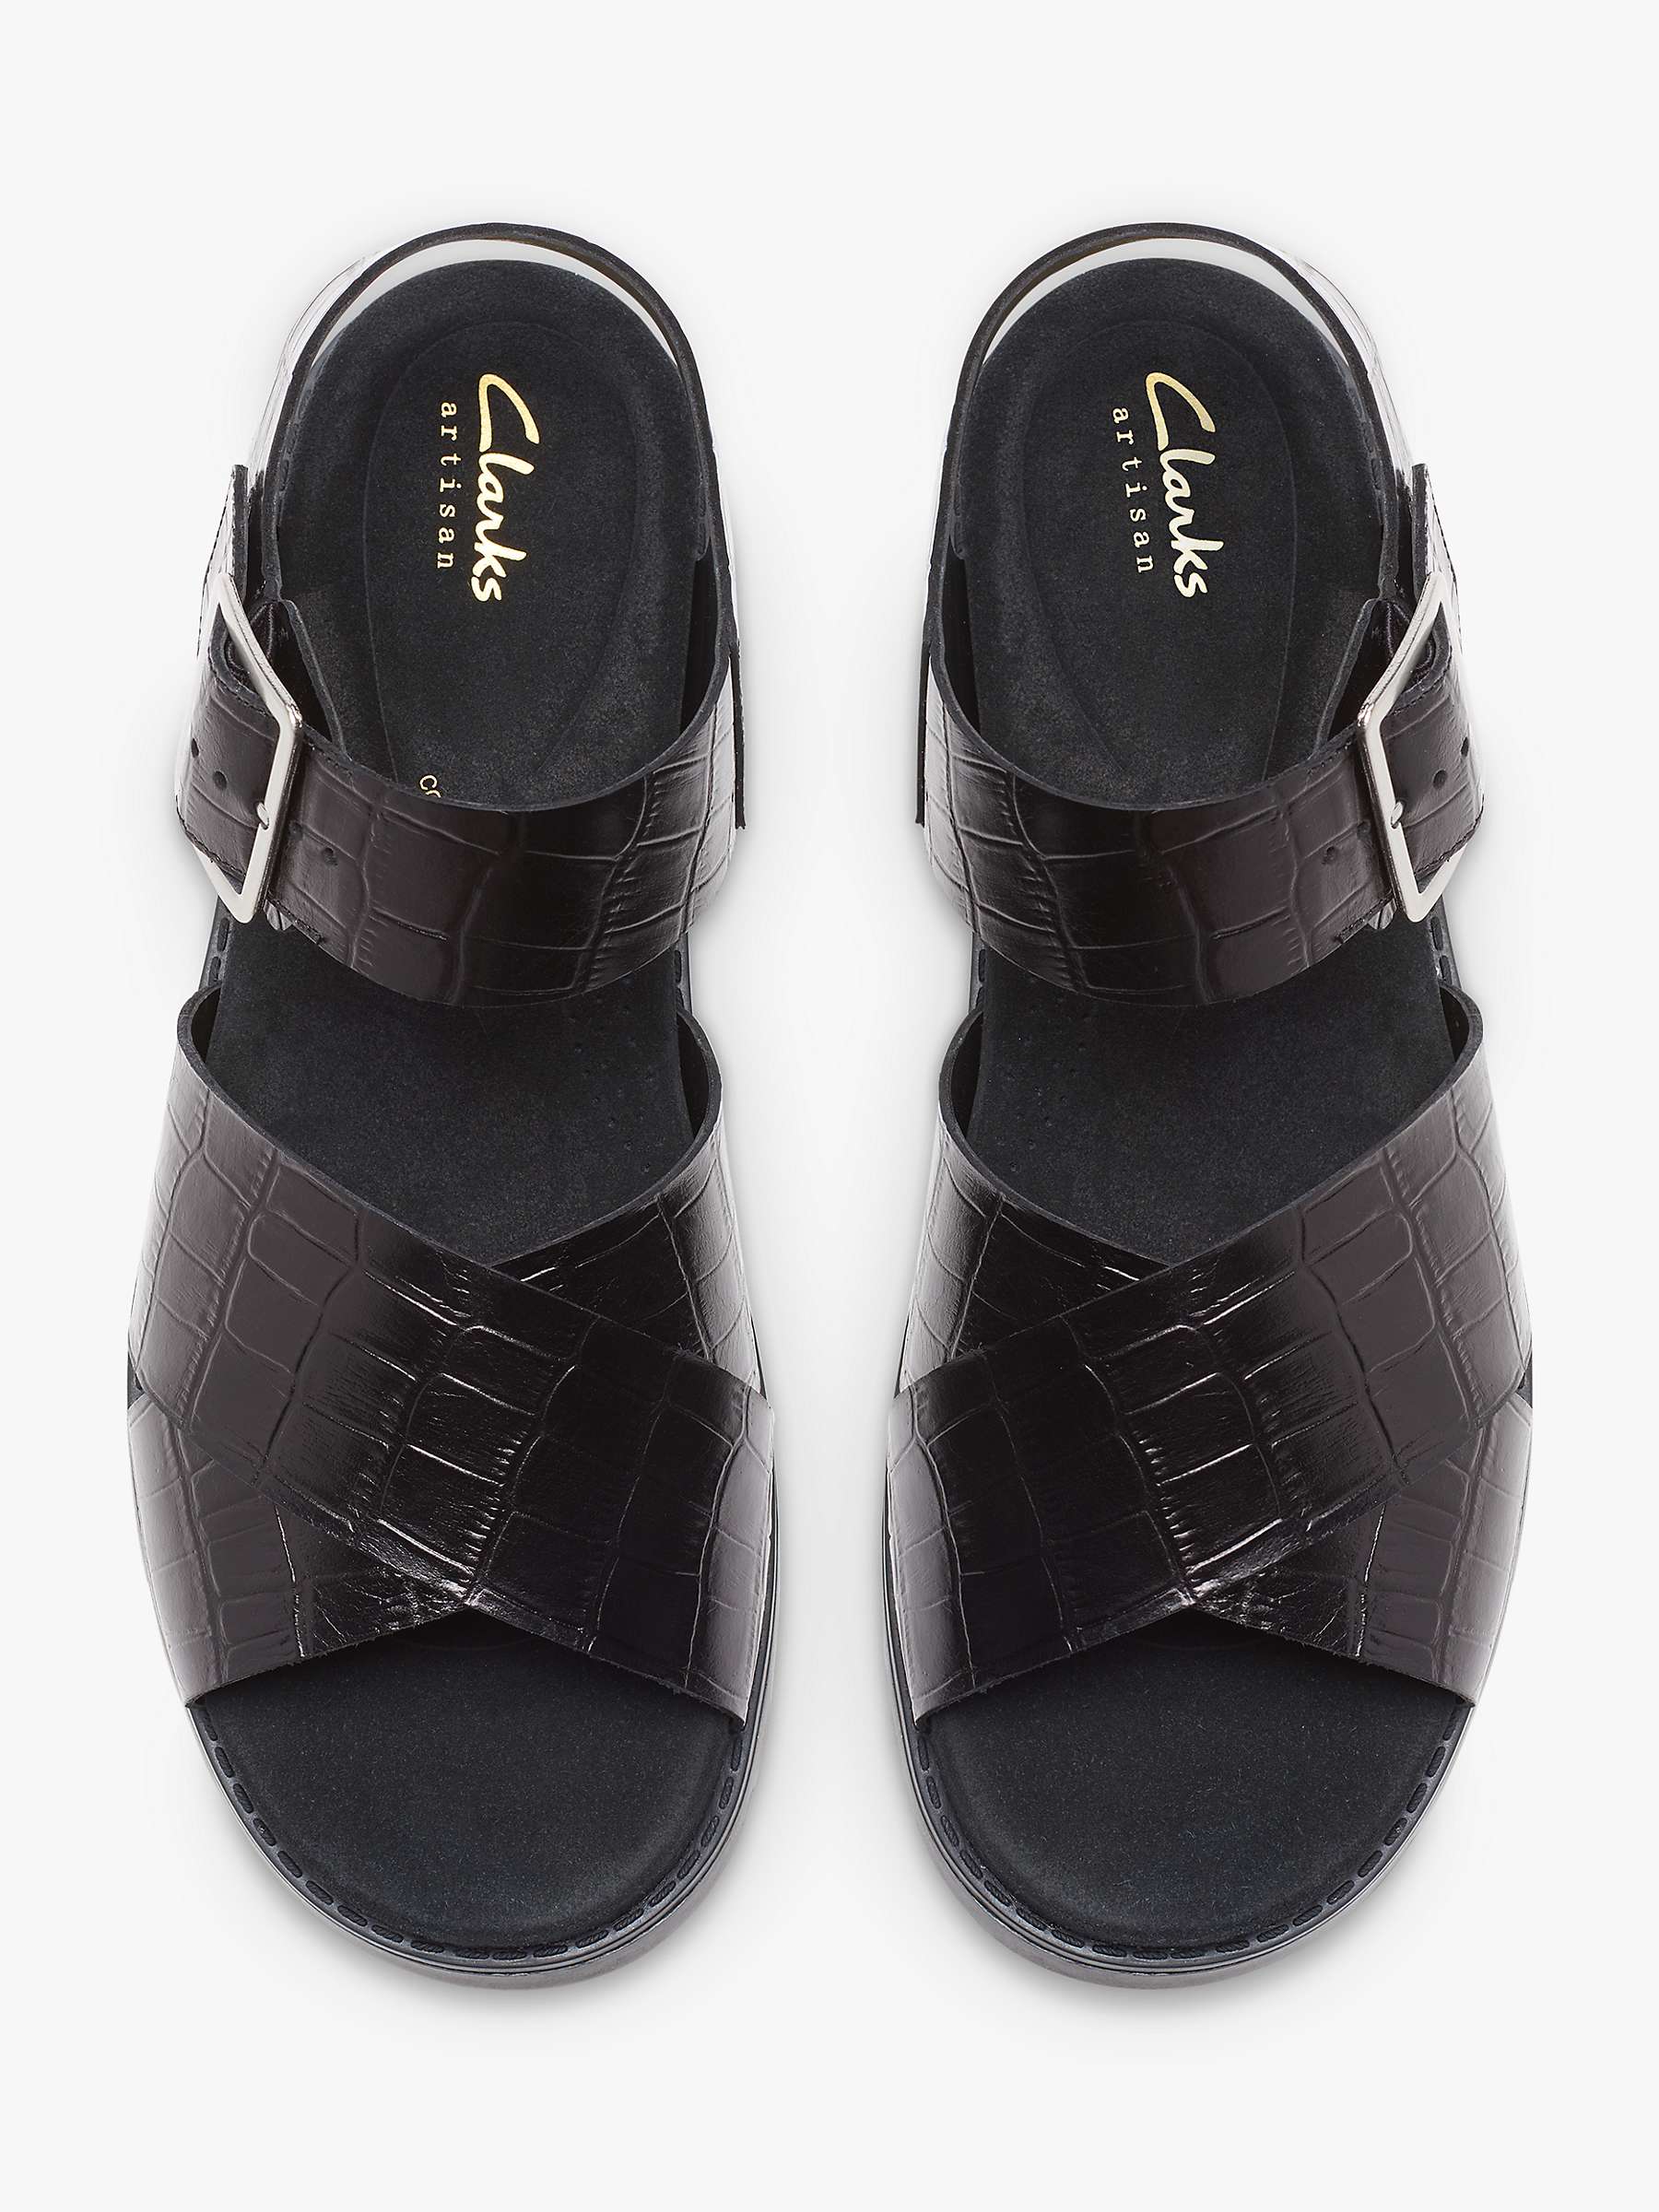 Buy Clarks Orinocco Wide Fit Textured Leather Cross Strap Sandals, Black Online at johnlewis.com